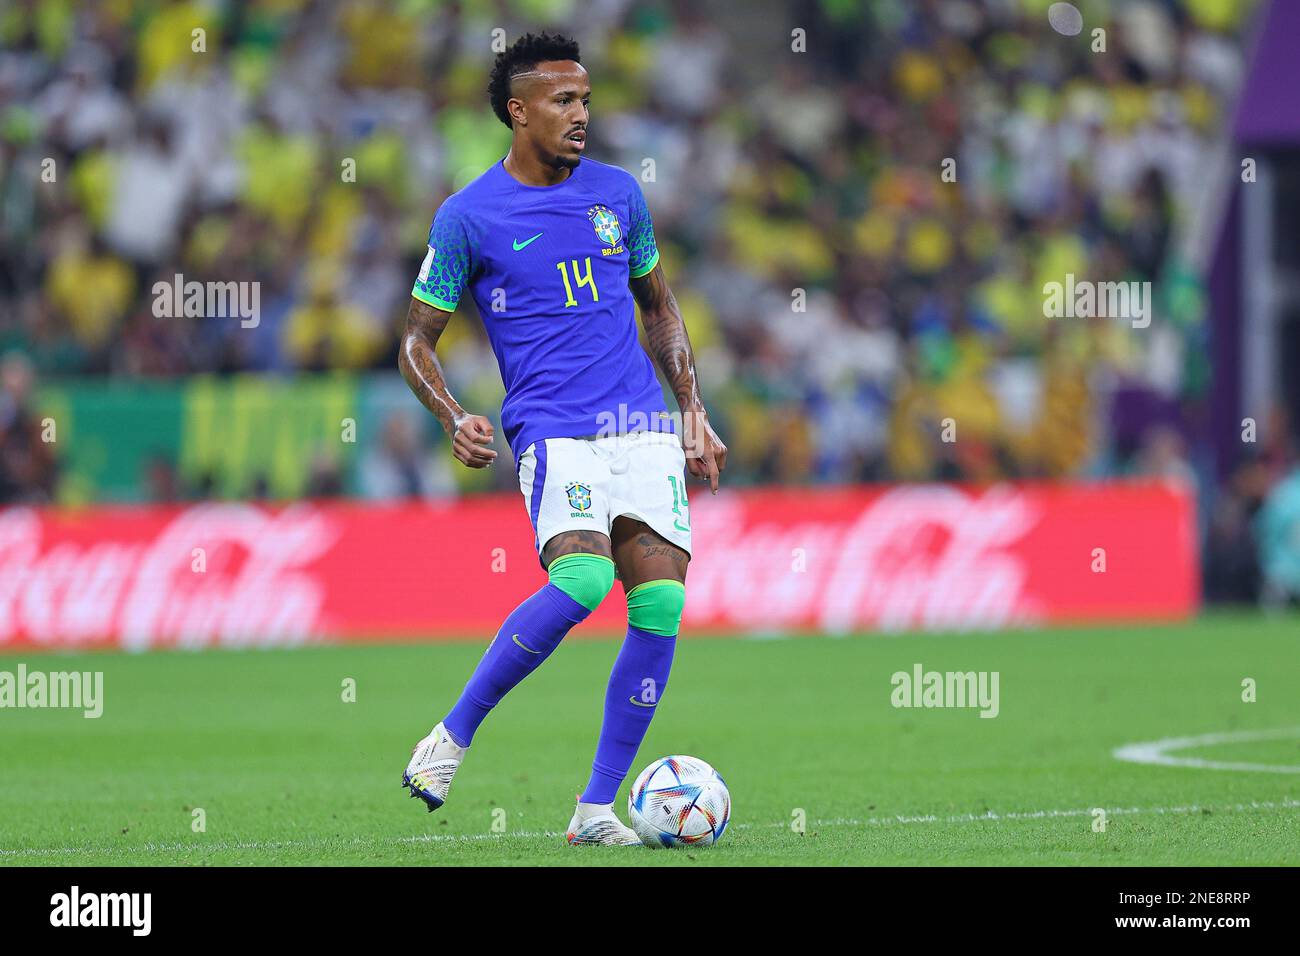 LUSAIL CITY, QATAR - DECEMBER 02: Eder Militao  during the FIFA World Cup Qatar 2022 Group G match between Cameroon and Brazil at Lusail Stadium on December 02, 2022 in Lusail City, Qatar. (Photo by MB Media) Stock Photo